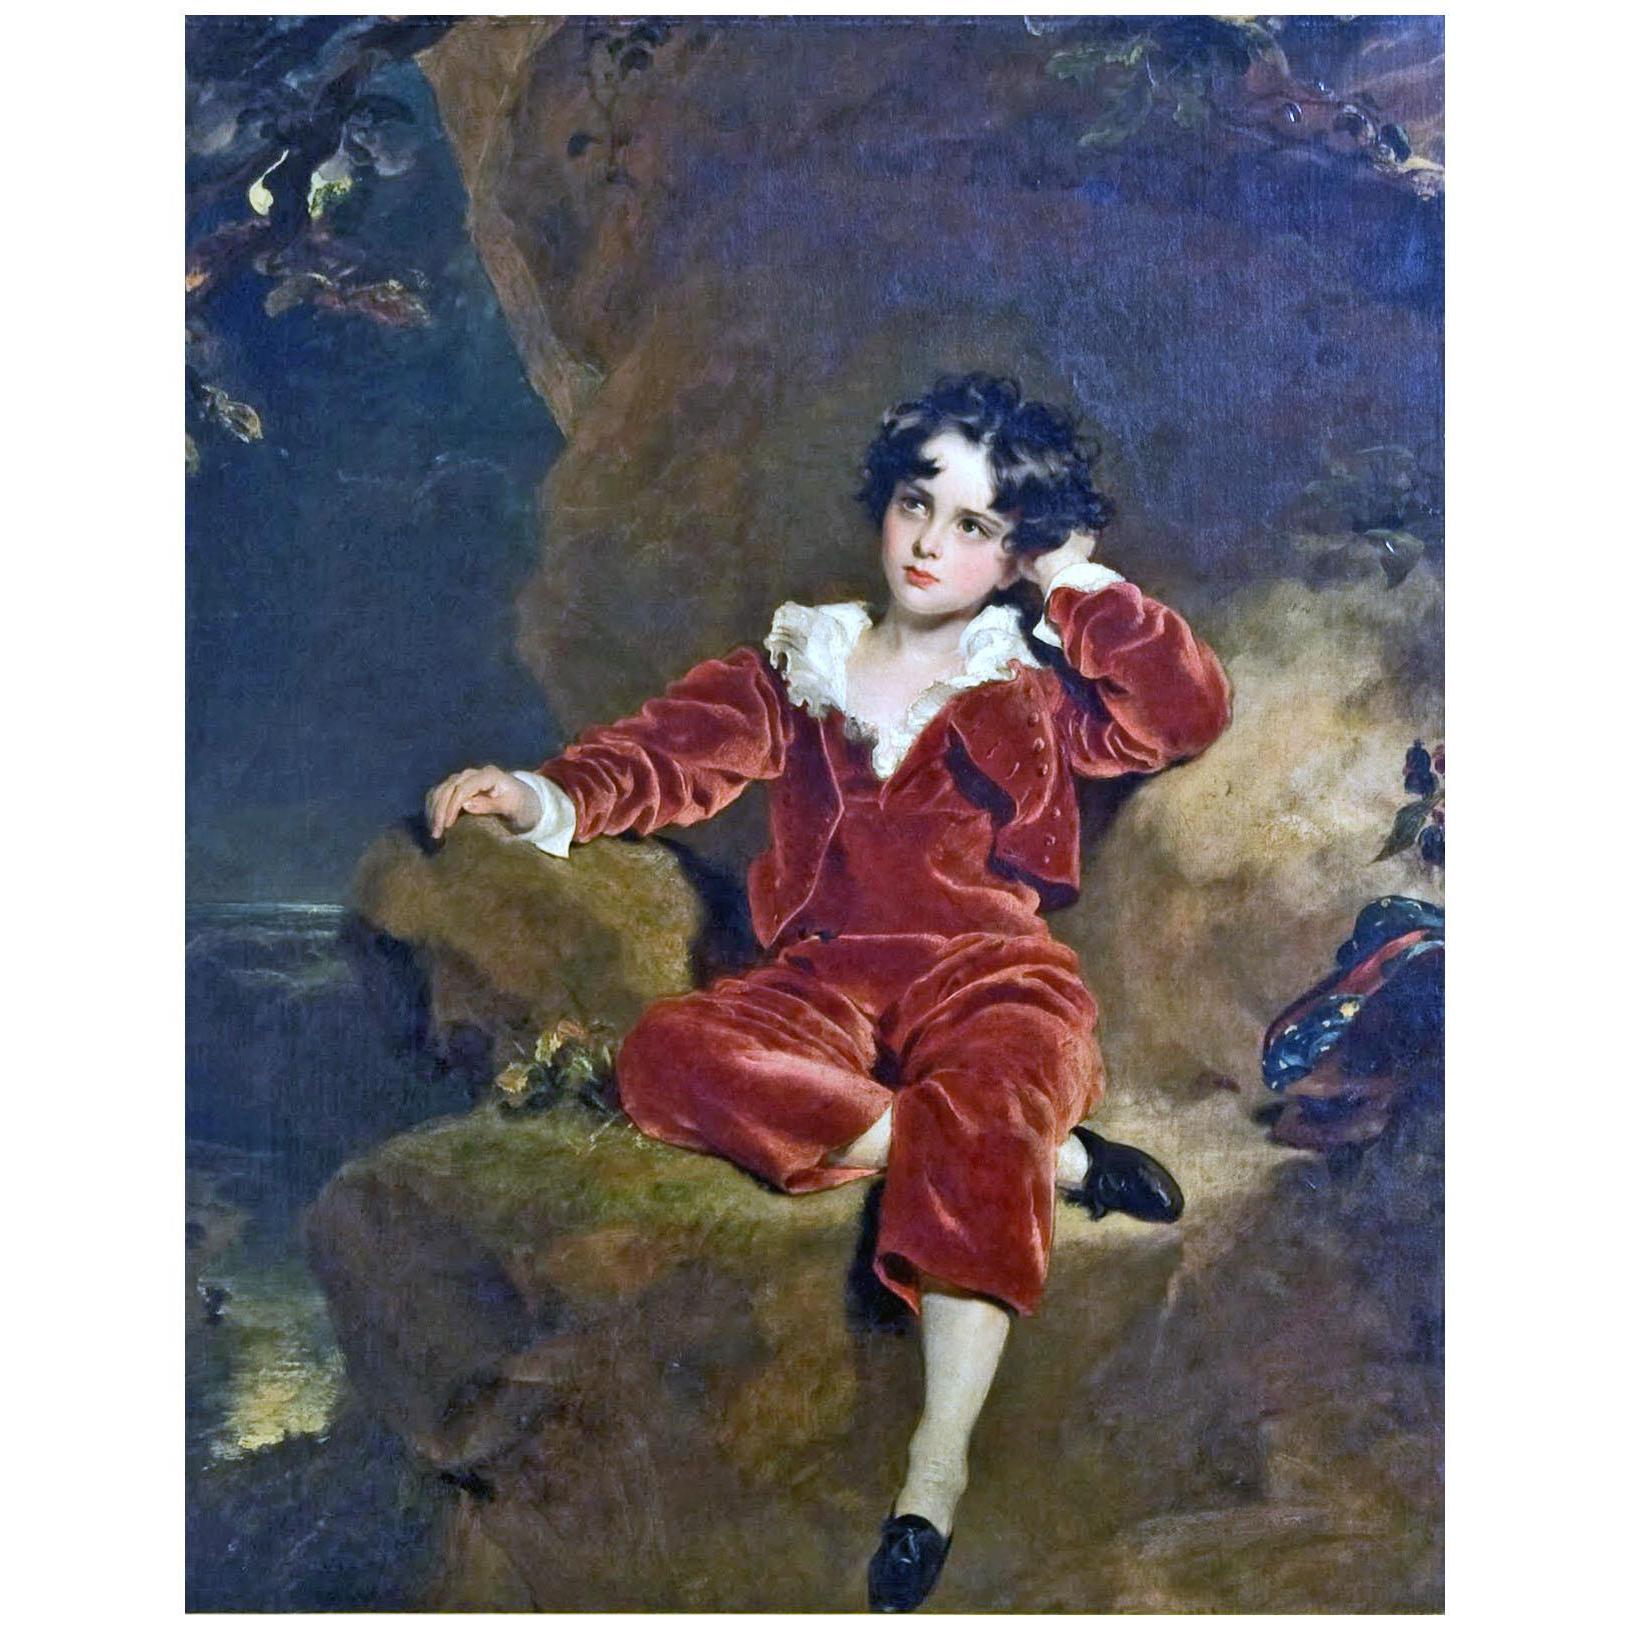 Thomas Lawrence. The Red Boy. 1825. National Gallery London